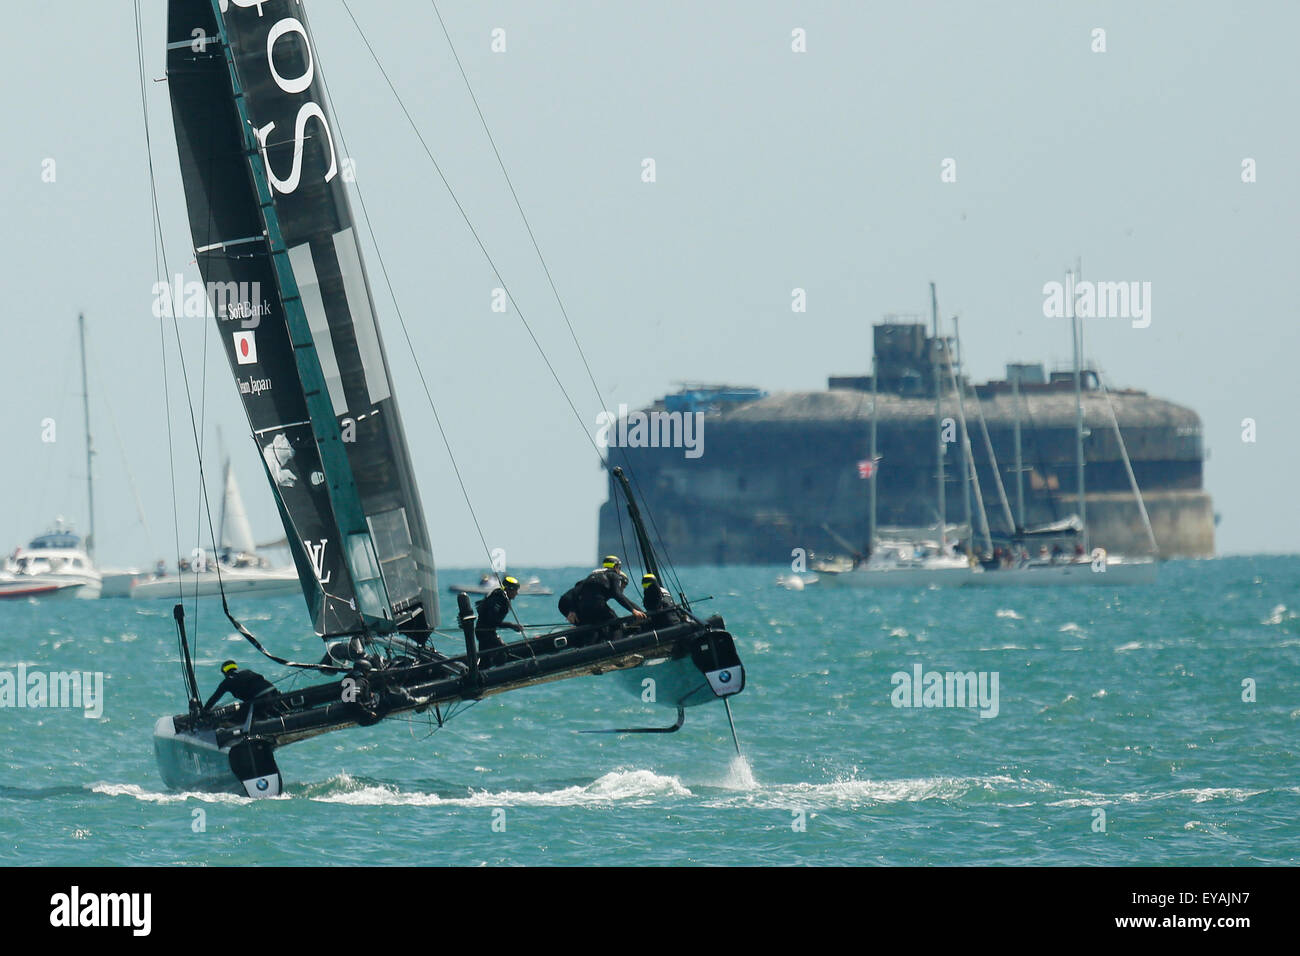 Portsmouth, UK. 25th July, 2015. SoftBank Team Japan compete in the first official race of the 35th America's Cup World Series Races at Portsmouth in Hampshire, UK Saturday July 25, 2015. The 2015 Portsmouth racing of the Louis Vuitton America's Cup World Series counts towards the qualifiers and playoffs which determine the challenger to compete against the title holders Oracle Team USA in 2017. Credit:  Luke MacGregor/Alamy Live News Stock Photo